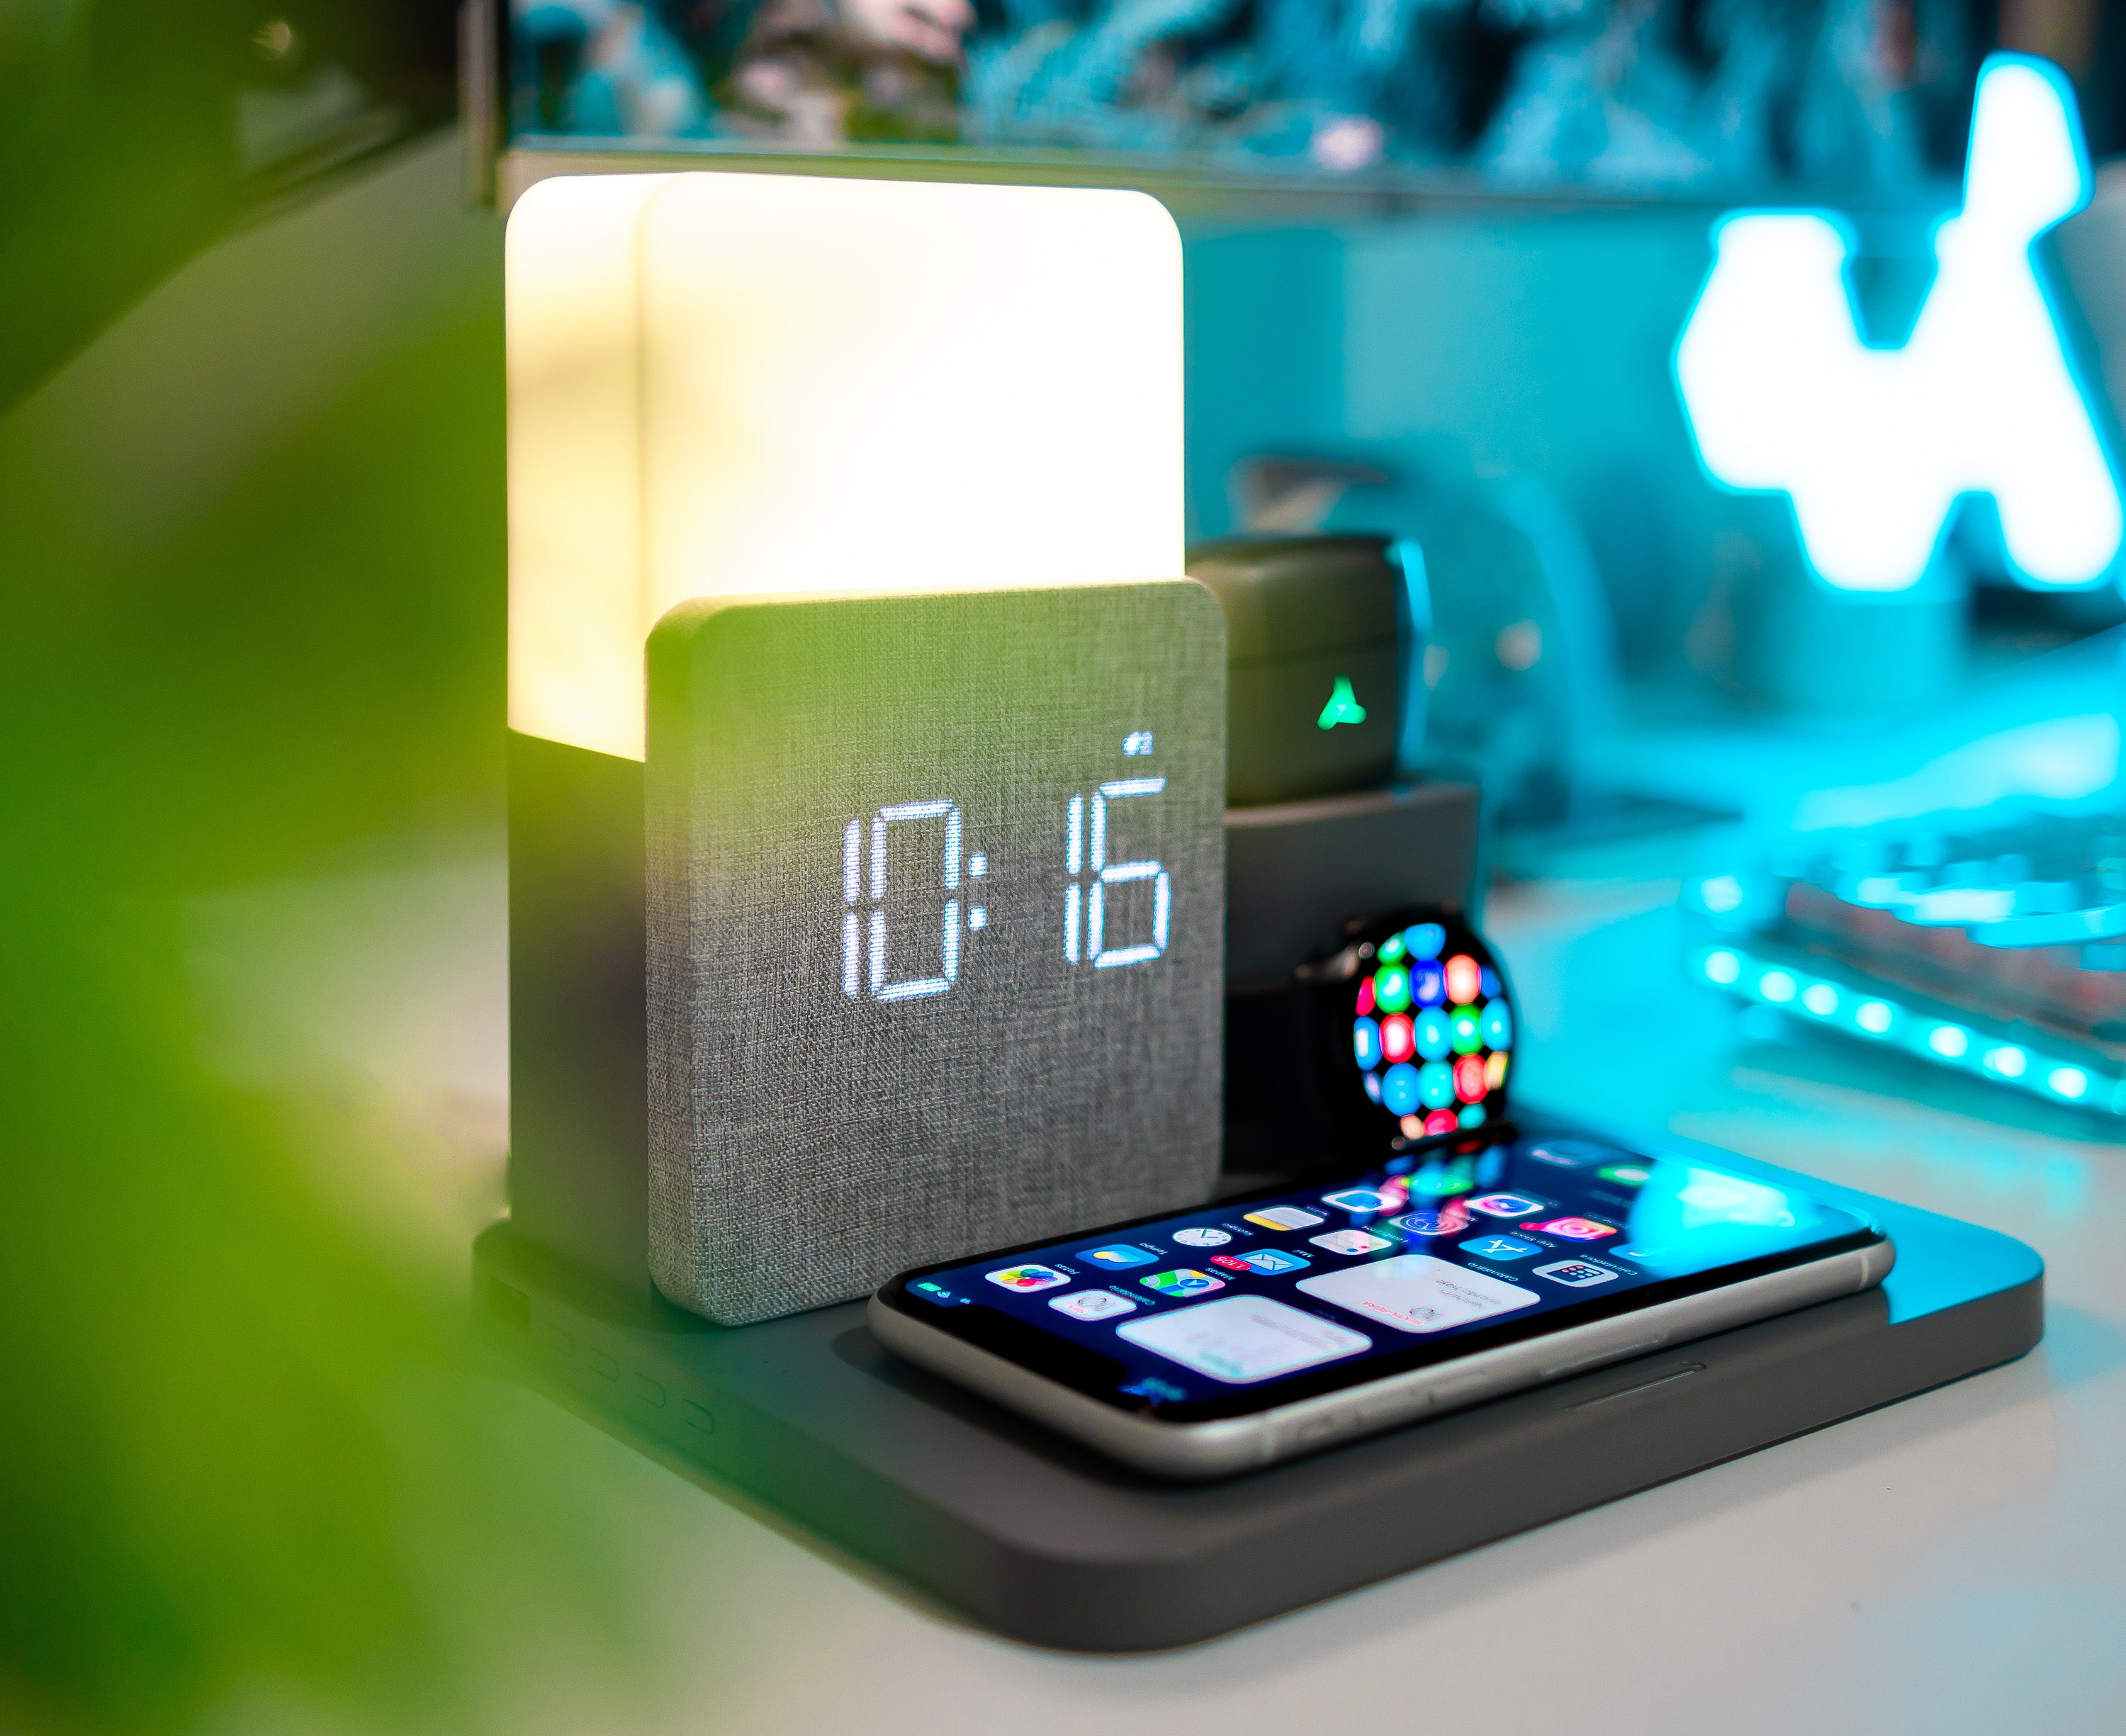 Dark grey alarm clock with wireless charging iphone, airpods and apple watch on a gaming desk with blue led lights in the back